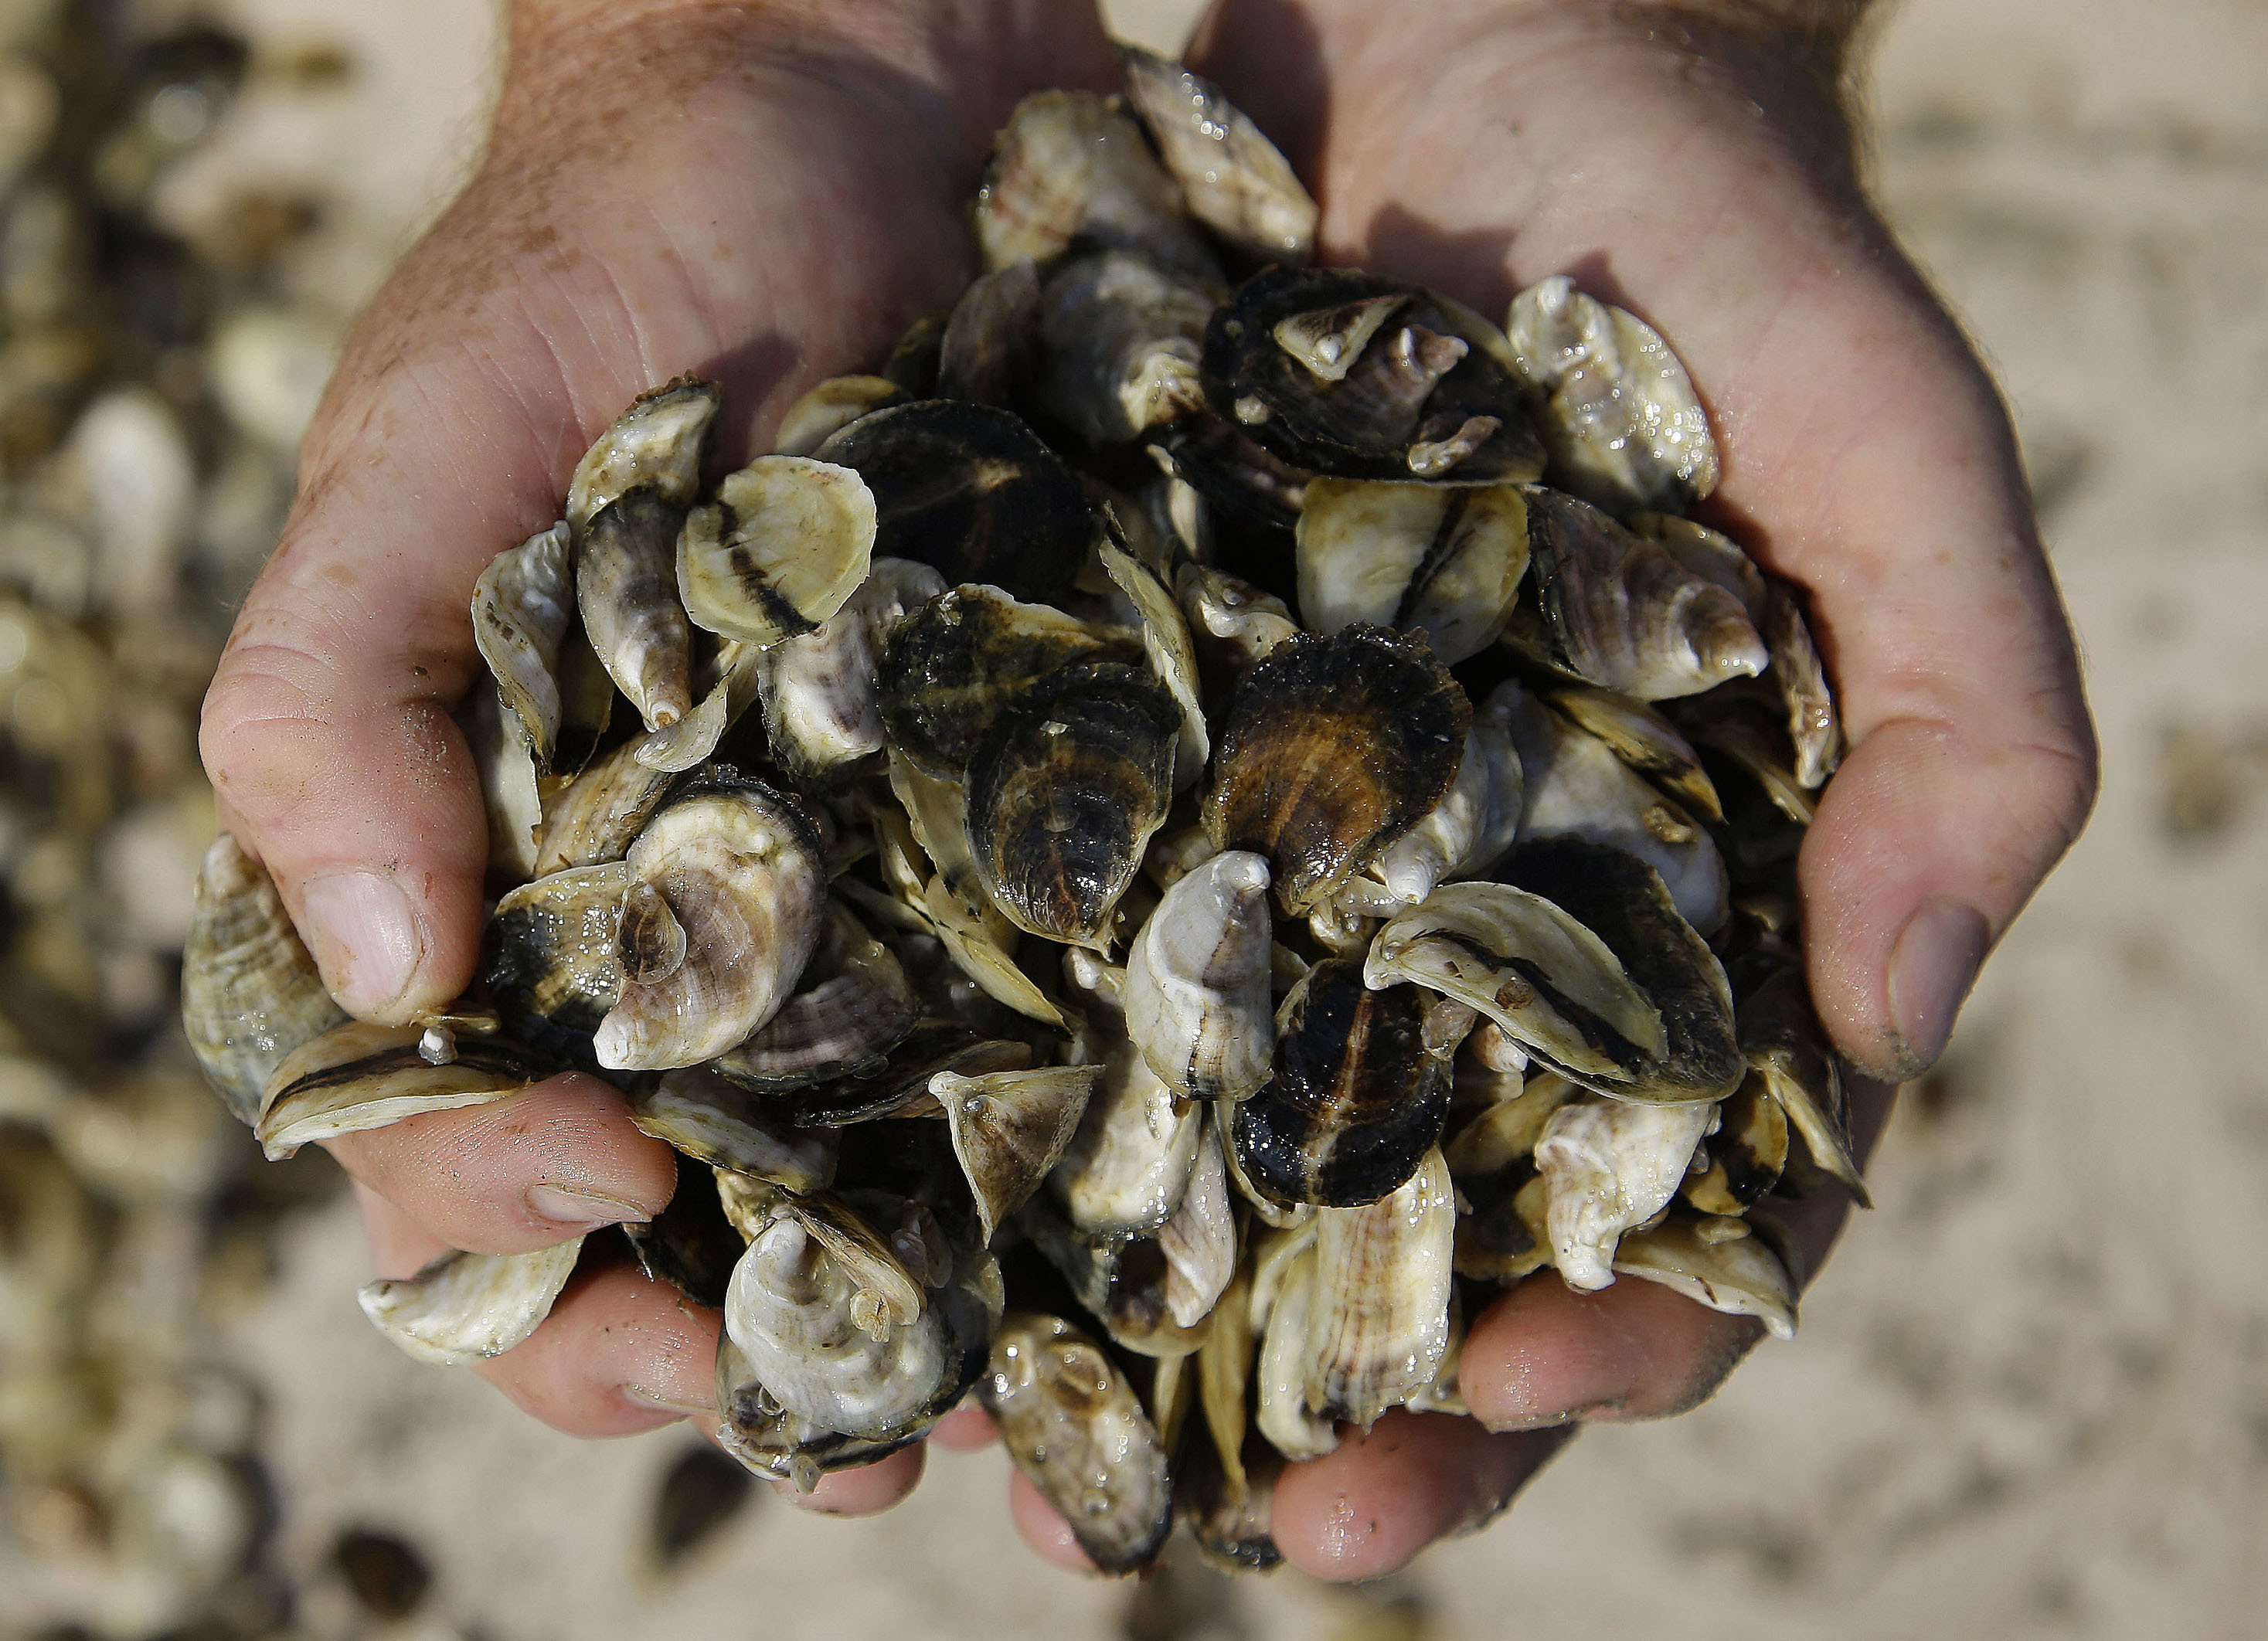 In this Monday, Sept. 12, 2013 file photo, an oyster cultivator holds oyster seed before spreading it into the waters of Duxbury Bay in Duxbury, Mass. A study published Monday, Aug. 8 connects rising temperatures to increasing rates of several waterborne diseases. About a dozen species of vibrio bacteria make people sick from eating raw or undercooked seafood, particularly oysters, or drinking or swimming in tainted water.